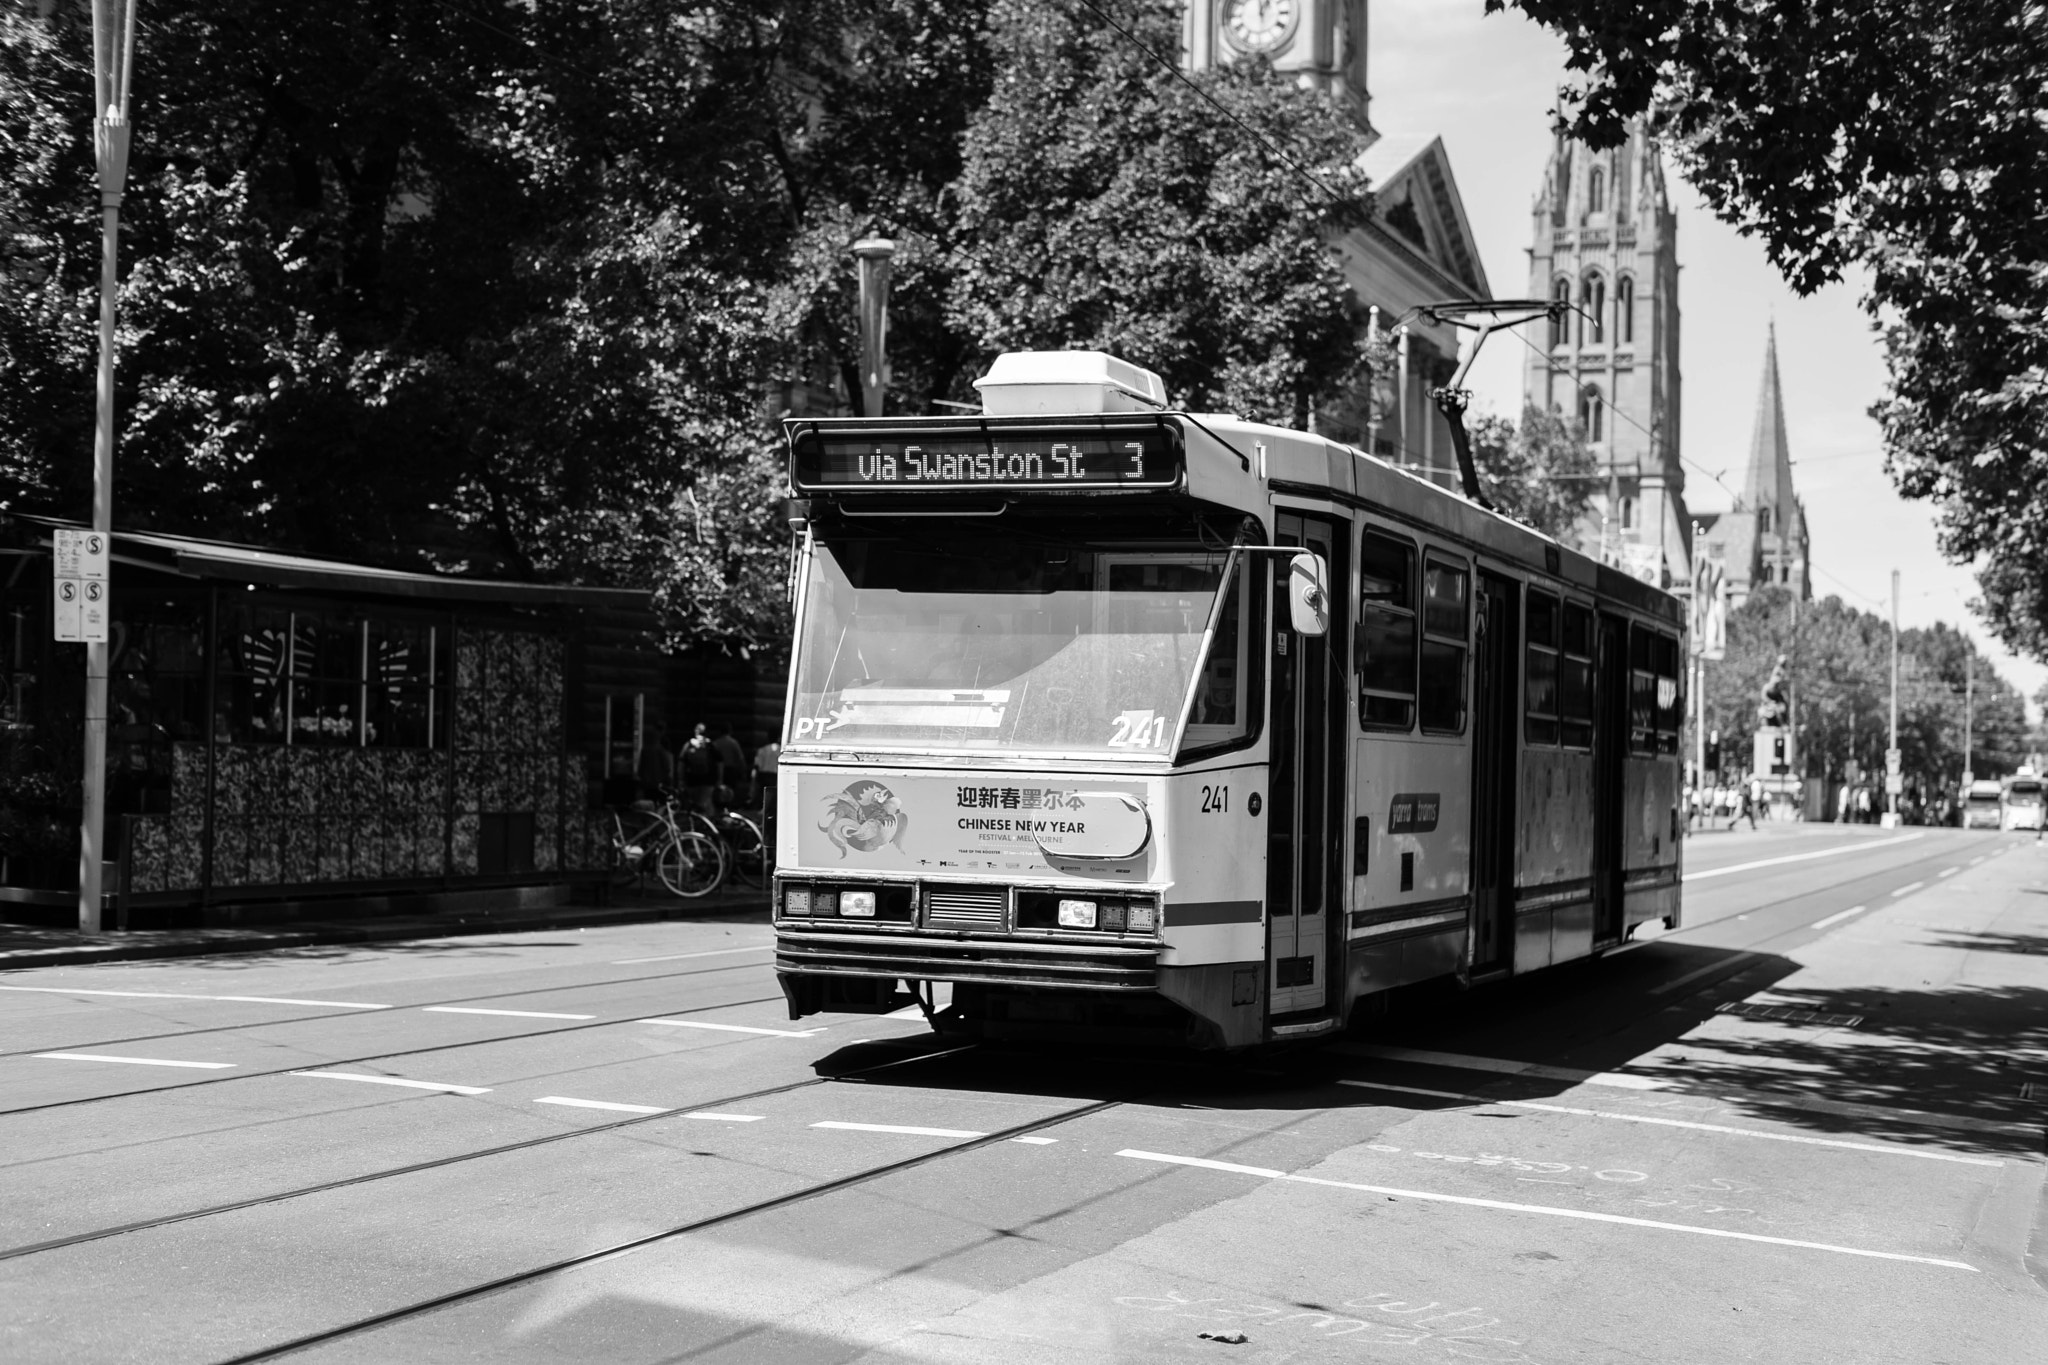 Sony a7 II sample photo. Melbourne tram black & white photography